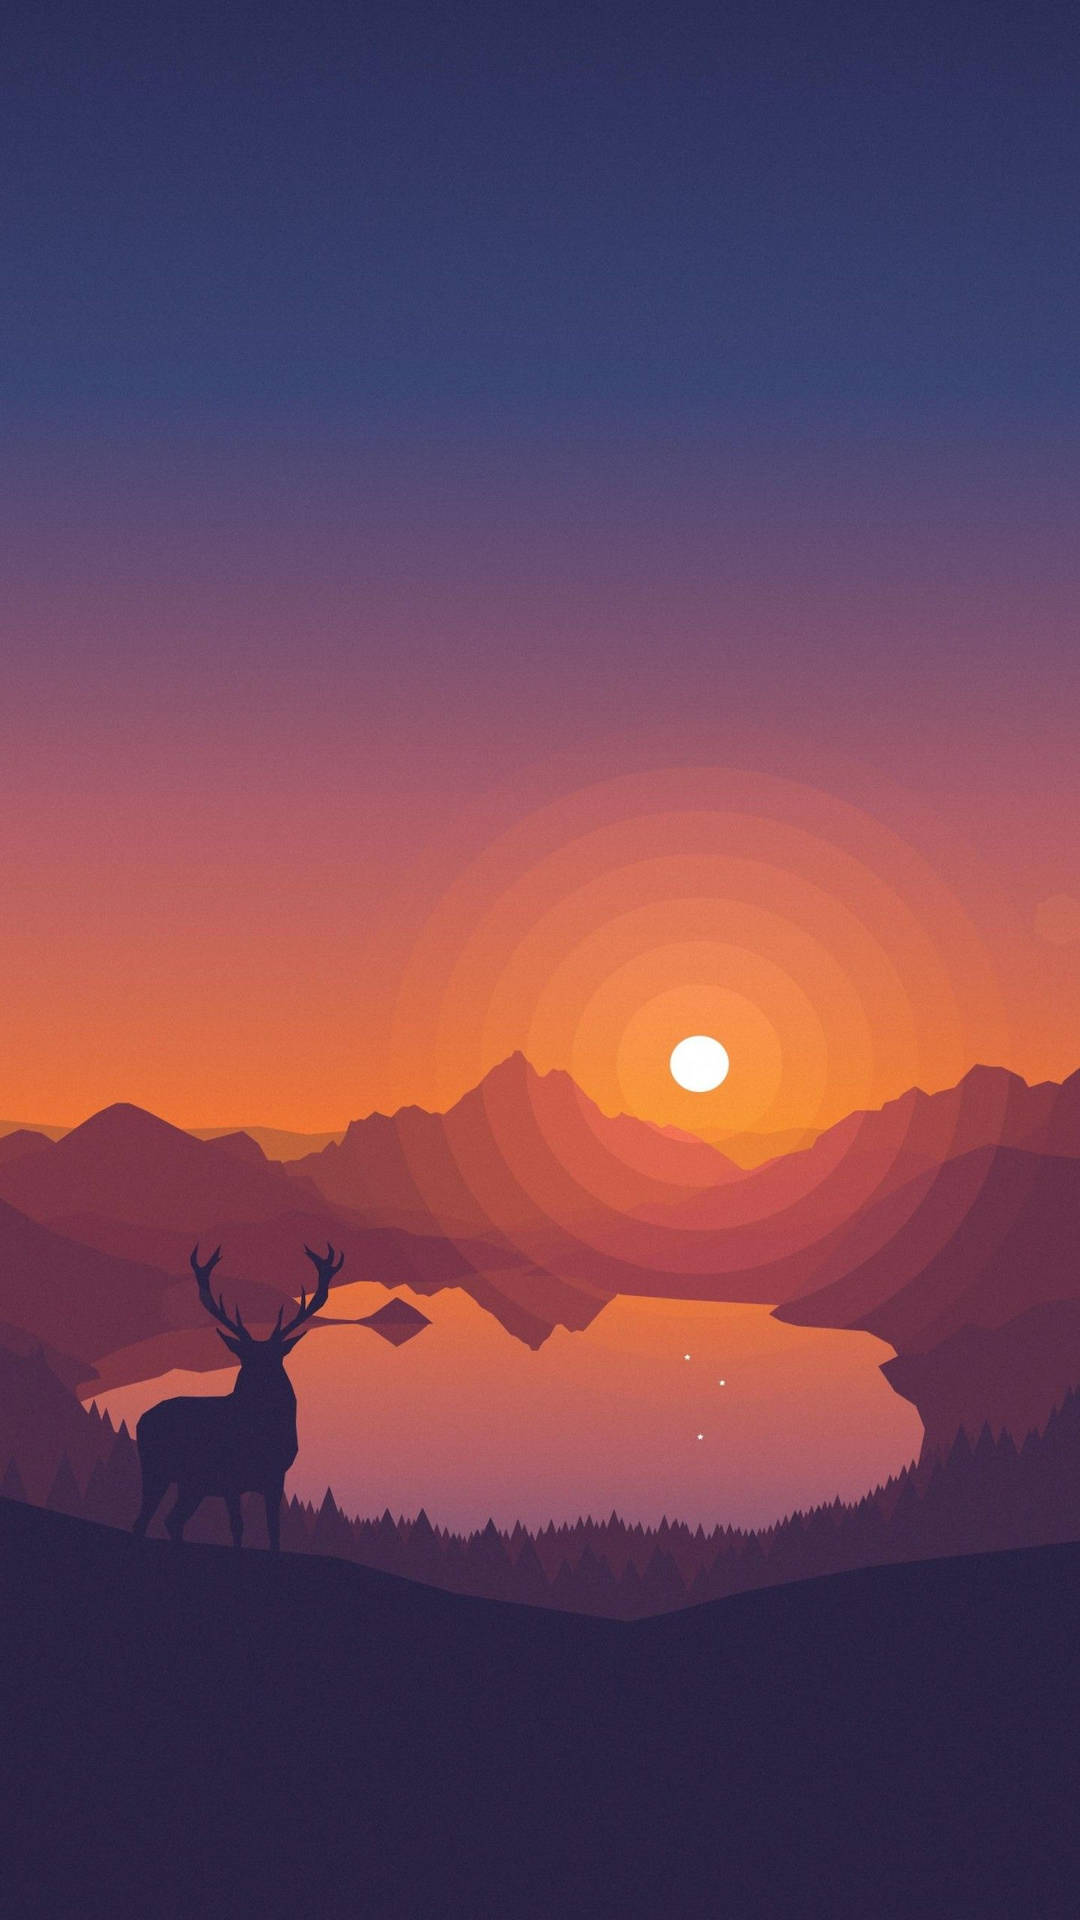 A tranquil and serene Deer at Dusk at Firewatch Wallpaper